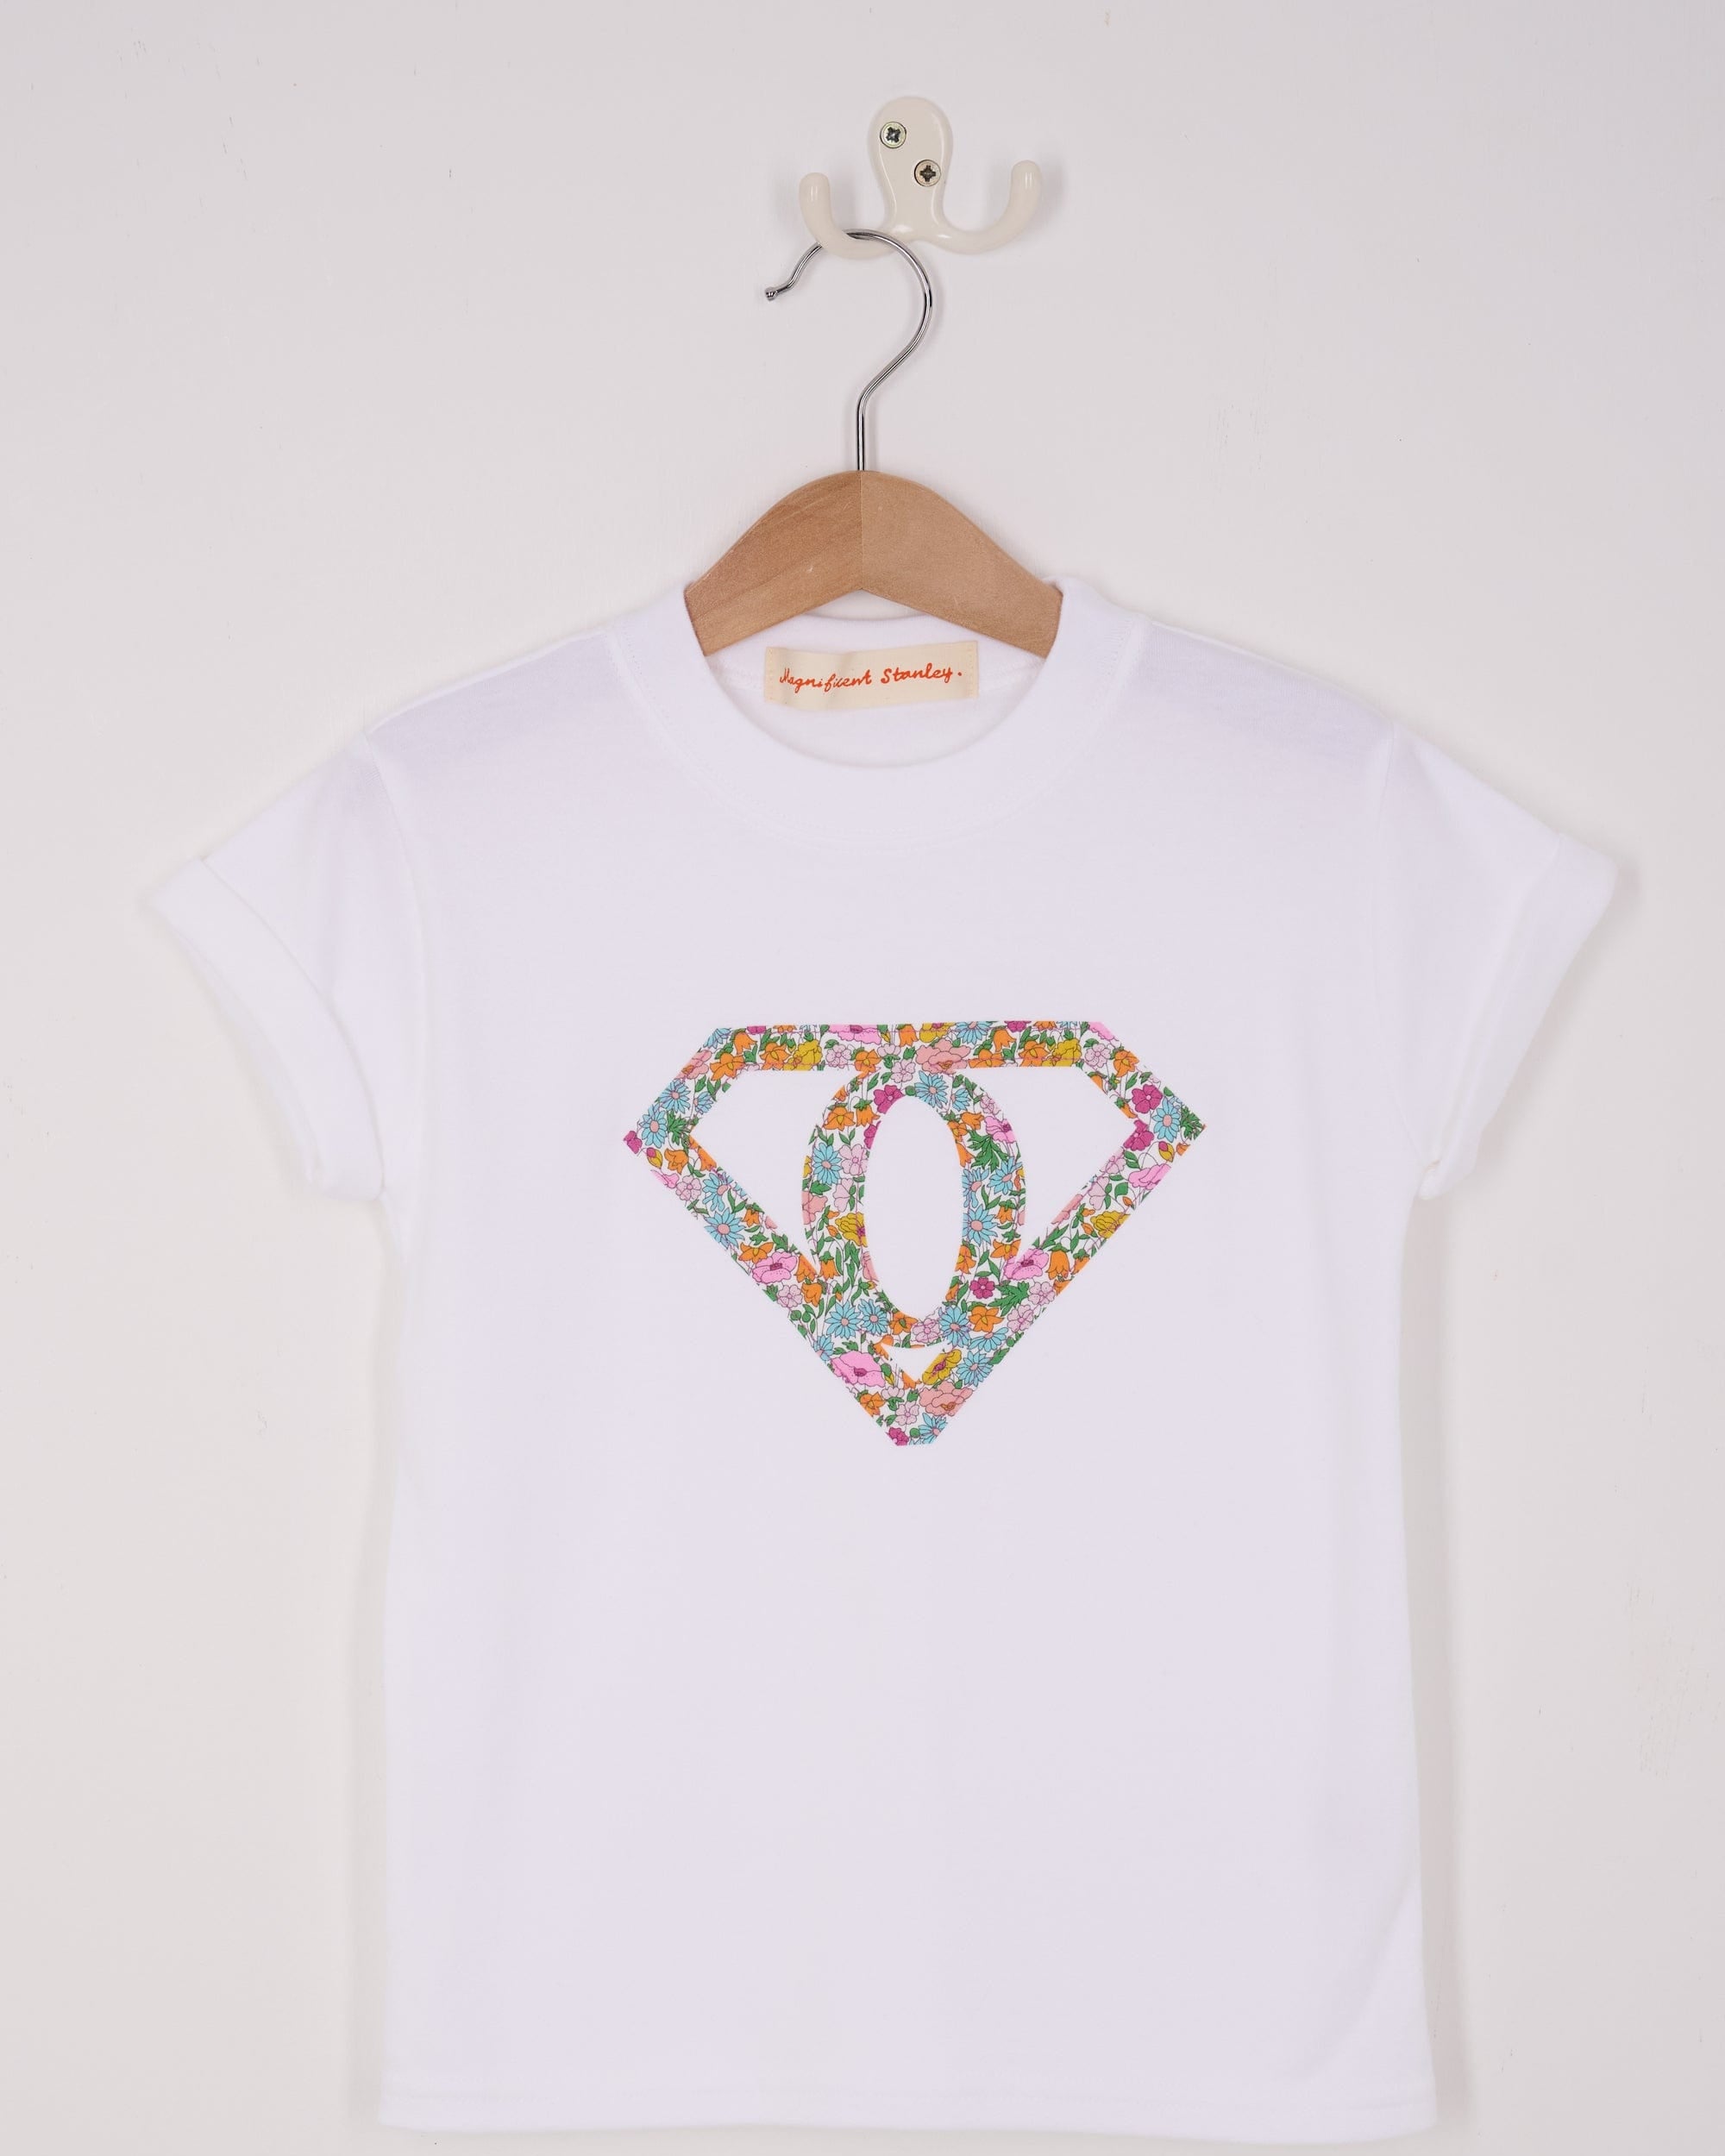 Magnificent Stanley Tee Superhero White T-Shirt in choice of Liberty Print